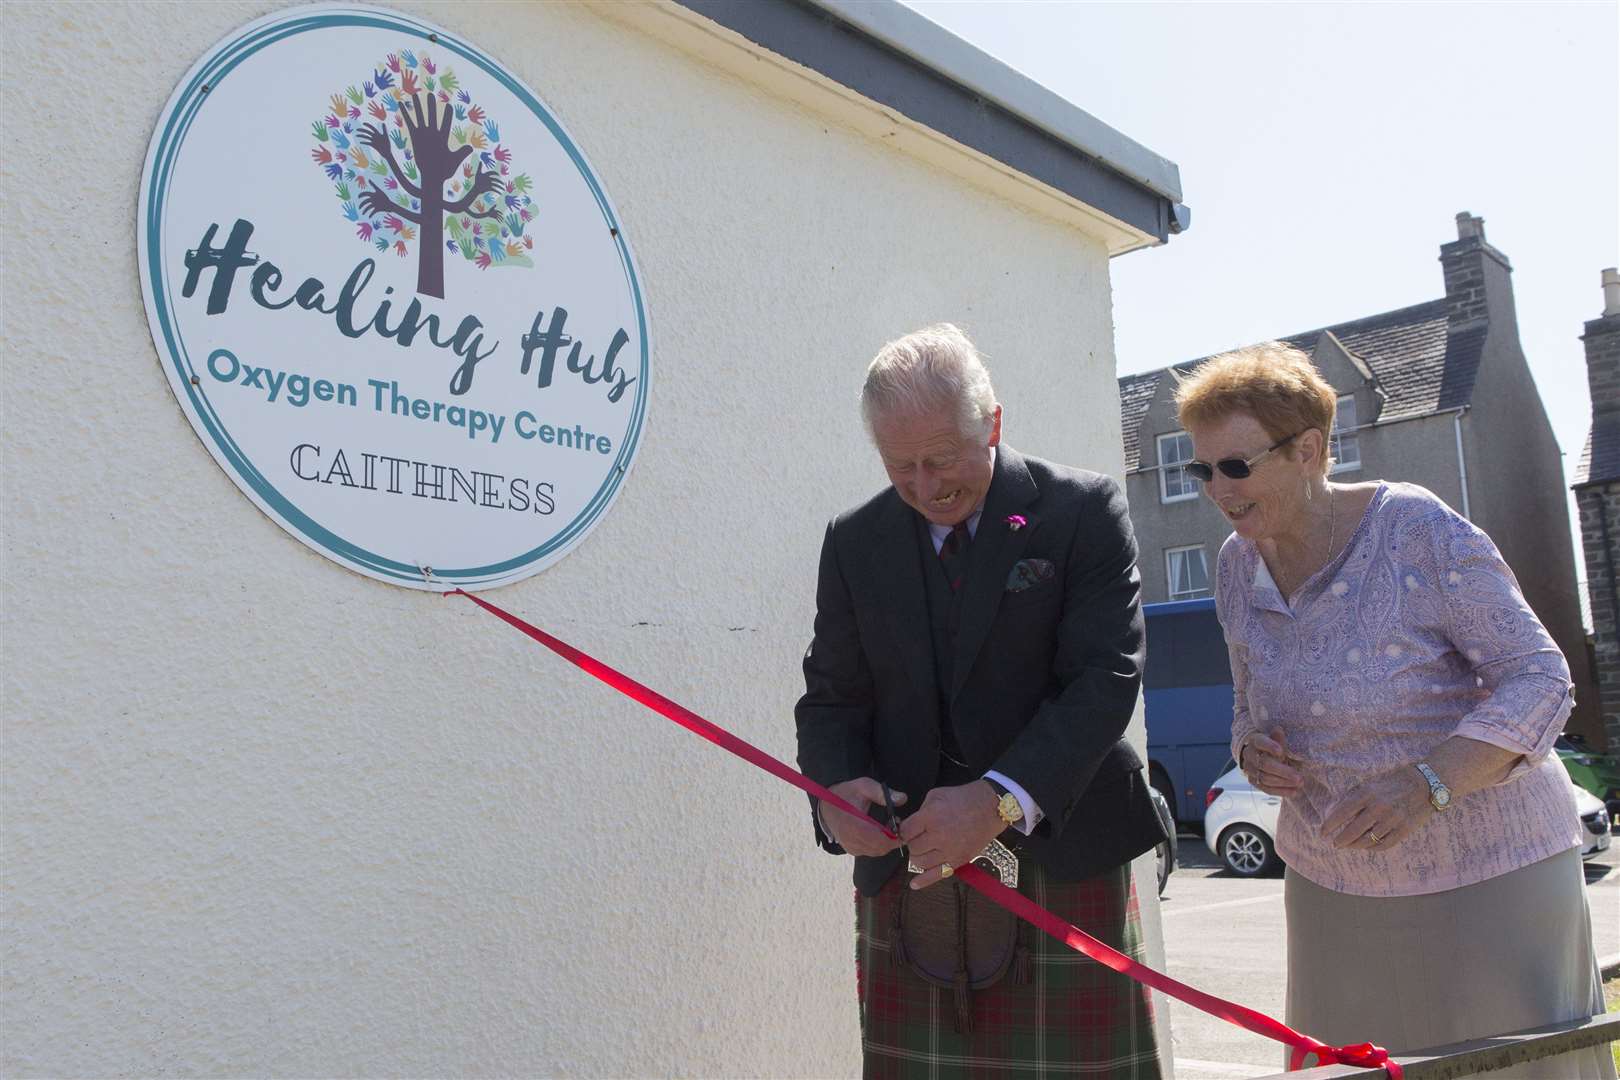 The Duke of Rothesay sees the humorous side as he attempts to cut the ribbon at the Healing Hub and finds that the scissors may not be quite sharp enough. Picture: Robert MacDonald / Northern Studios